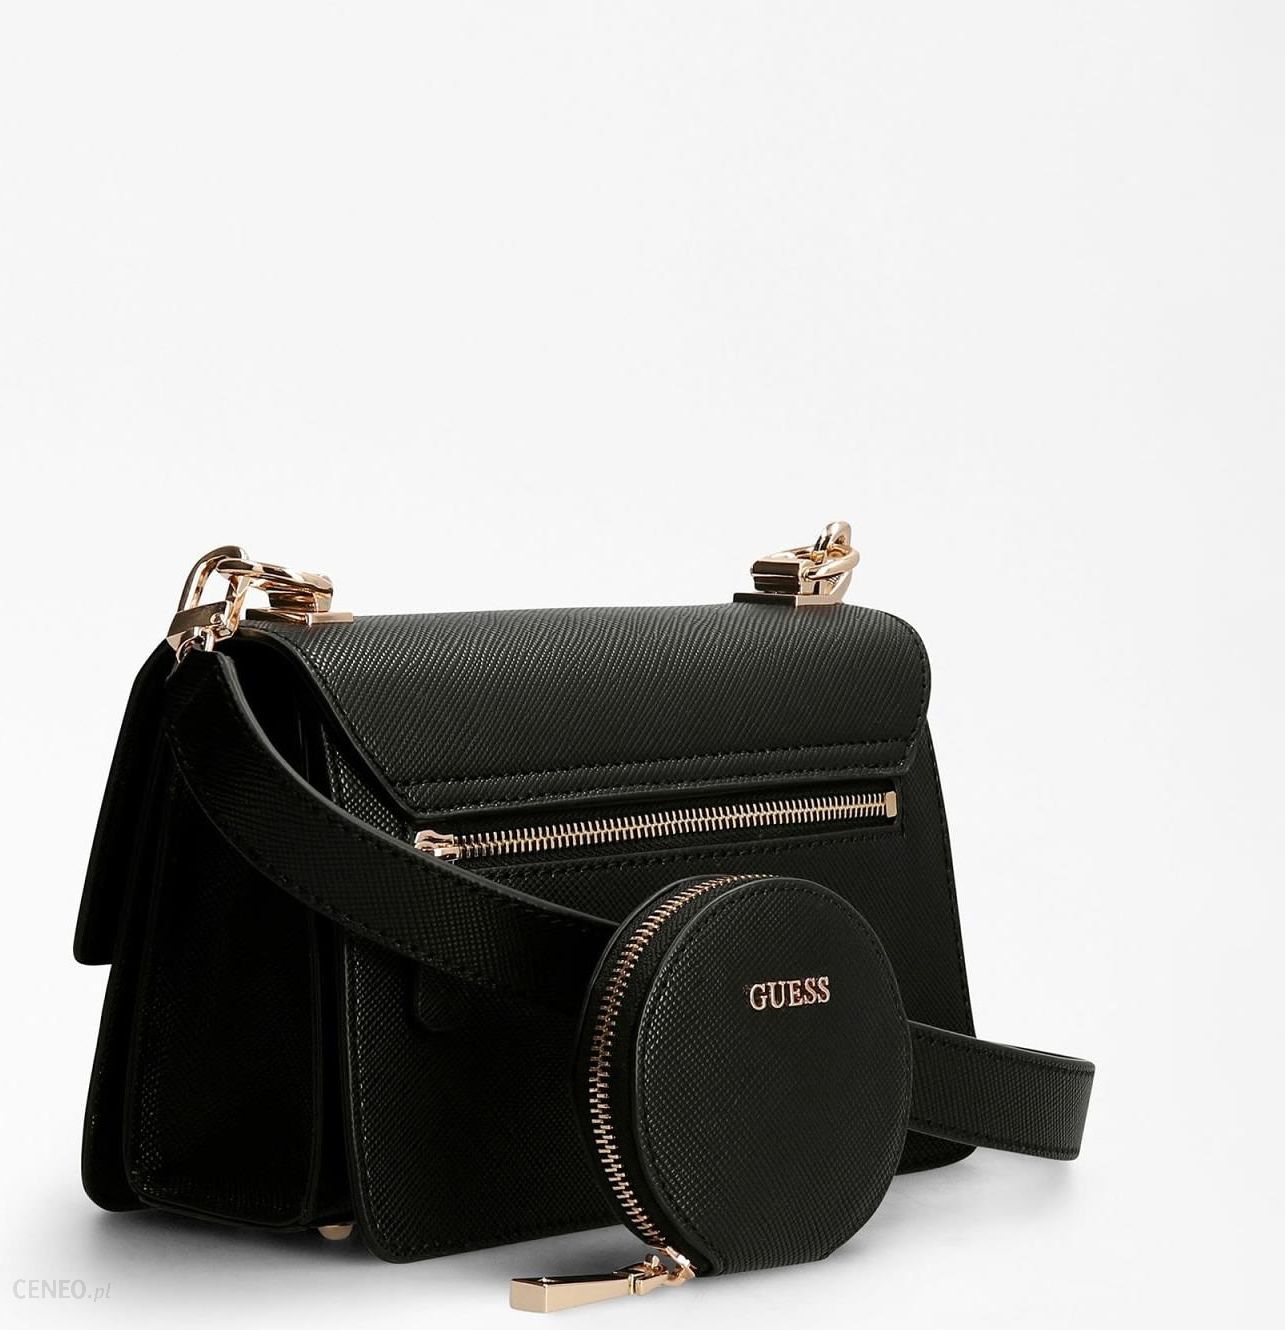 Guess Alexie Crossbody Flap Black Totes Bag - Guess - Torby